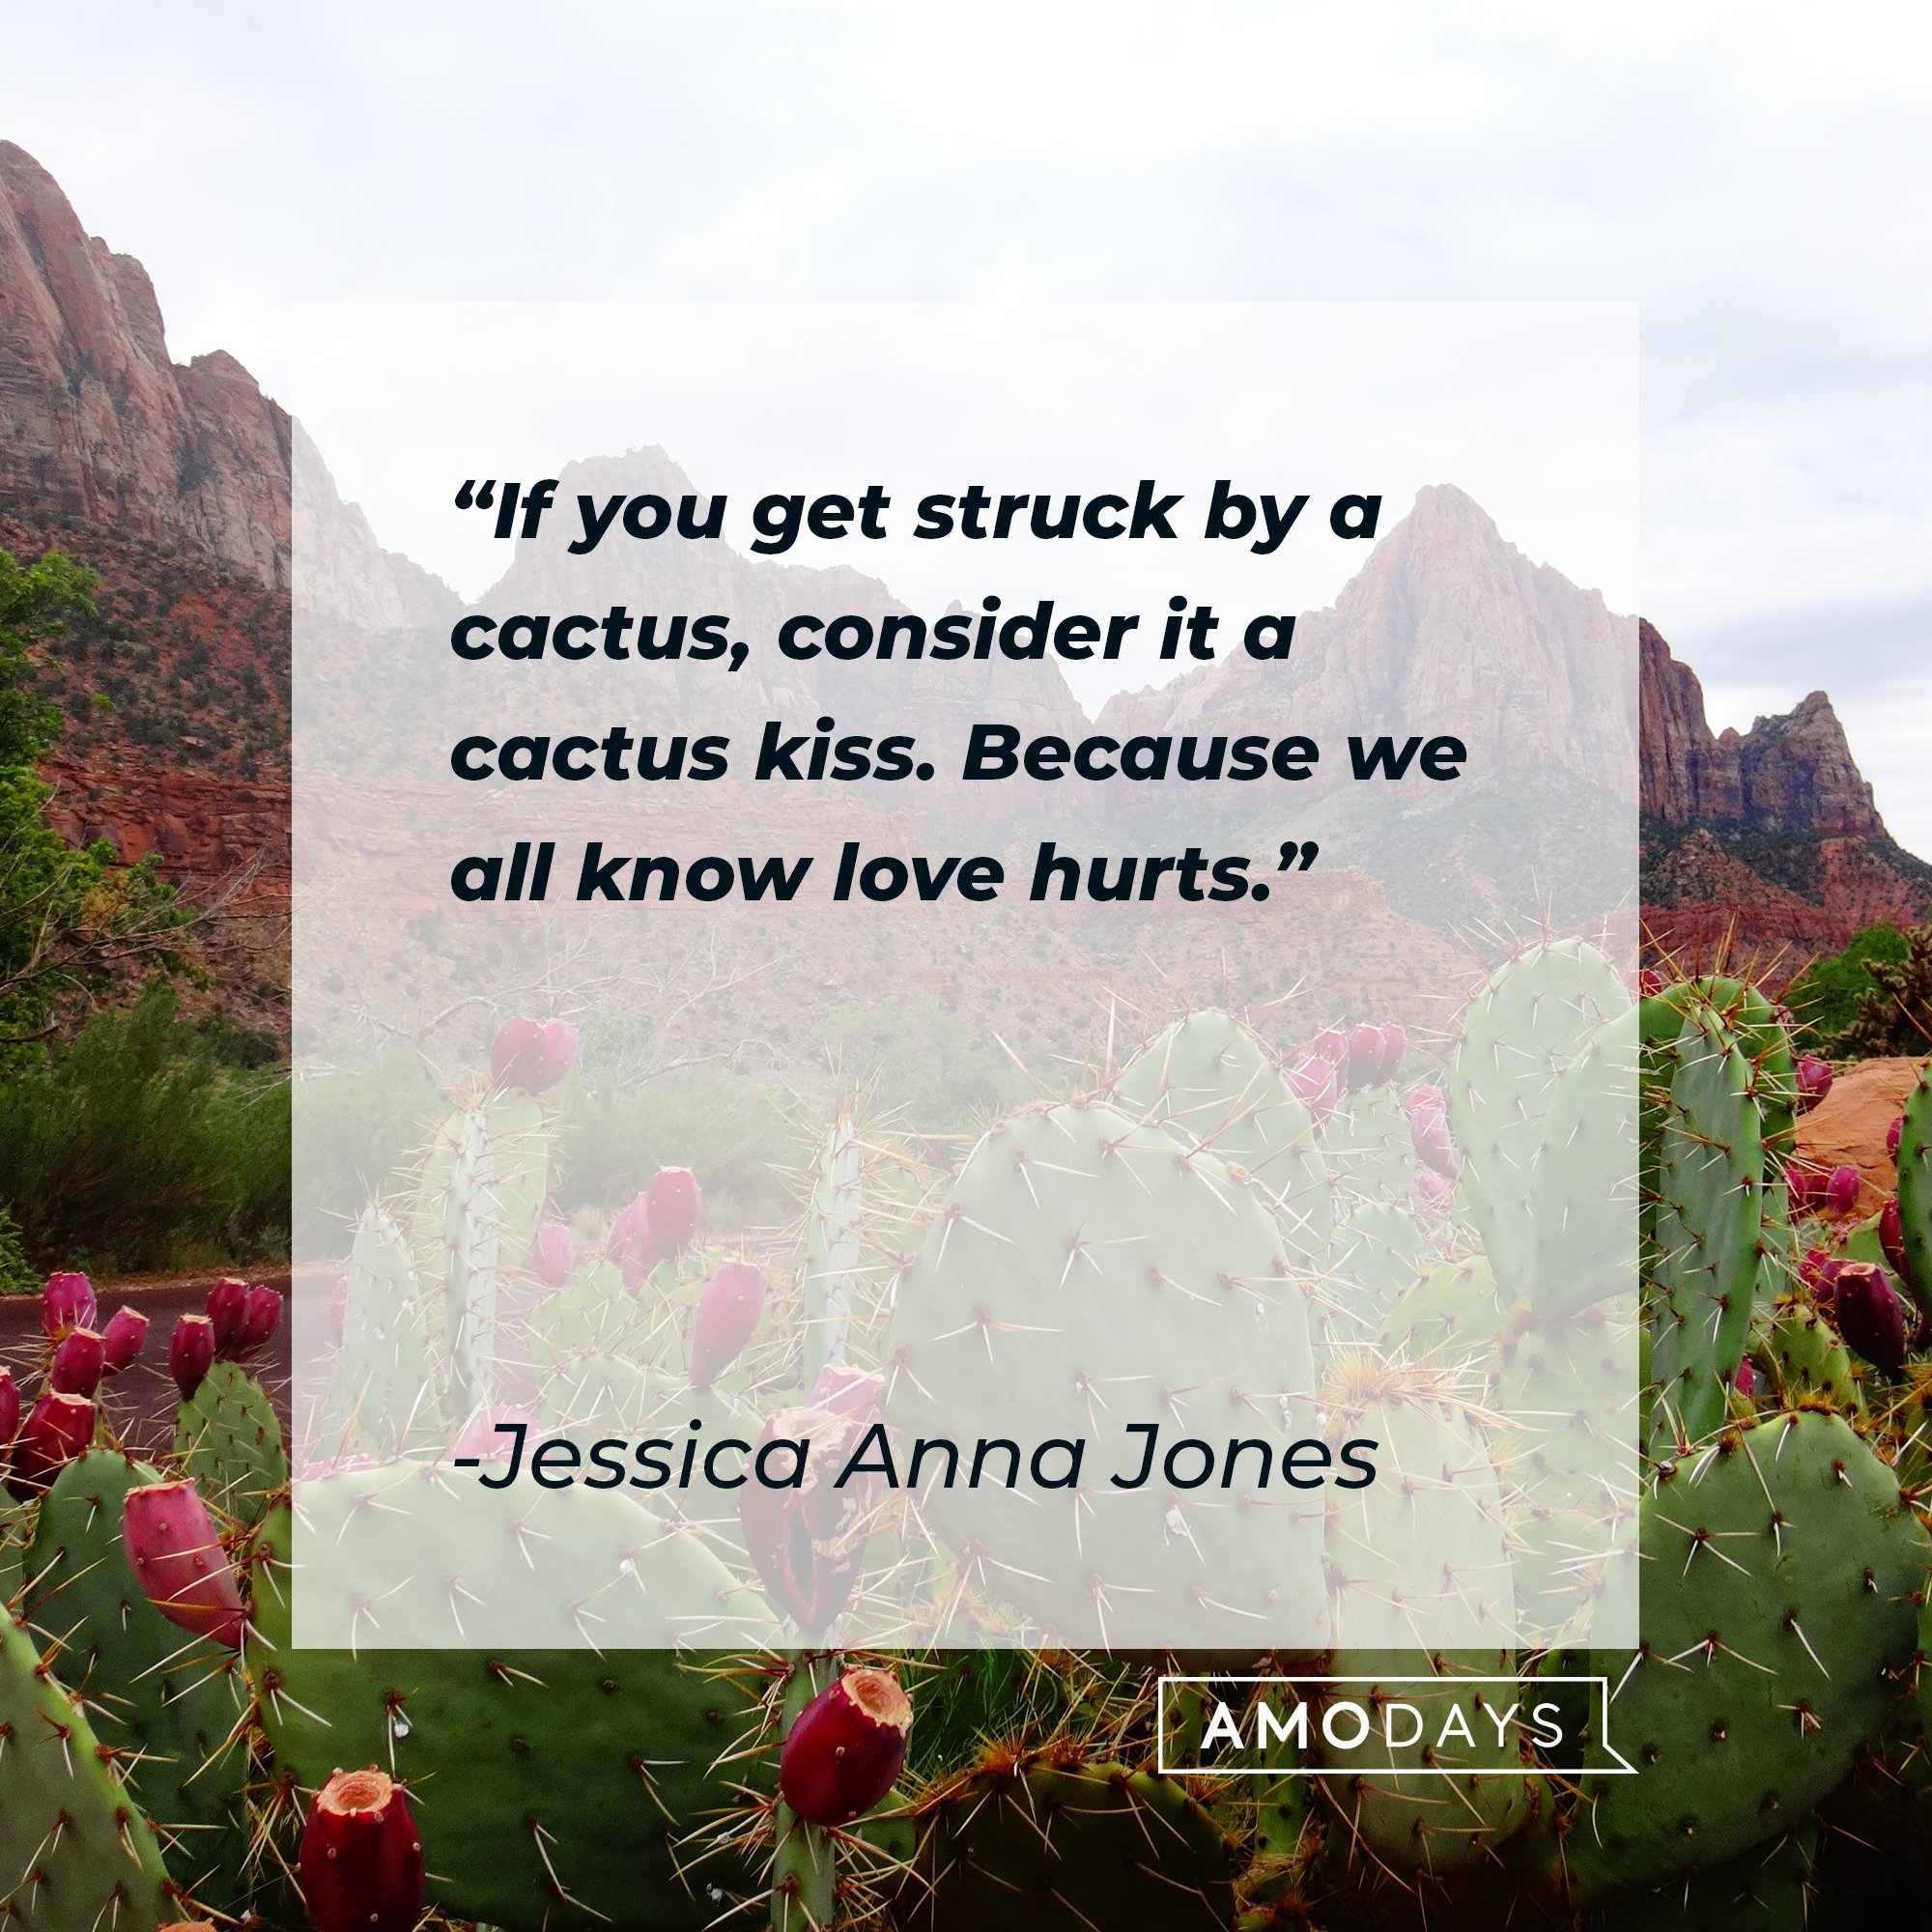 Jessica Anna Jones’ quote: "If you get struck by a cactus, consider it a cactus kiss. Because we all know love hurts." | Image: AmoDays